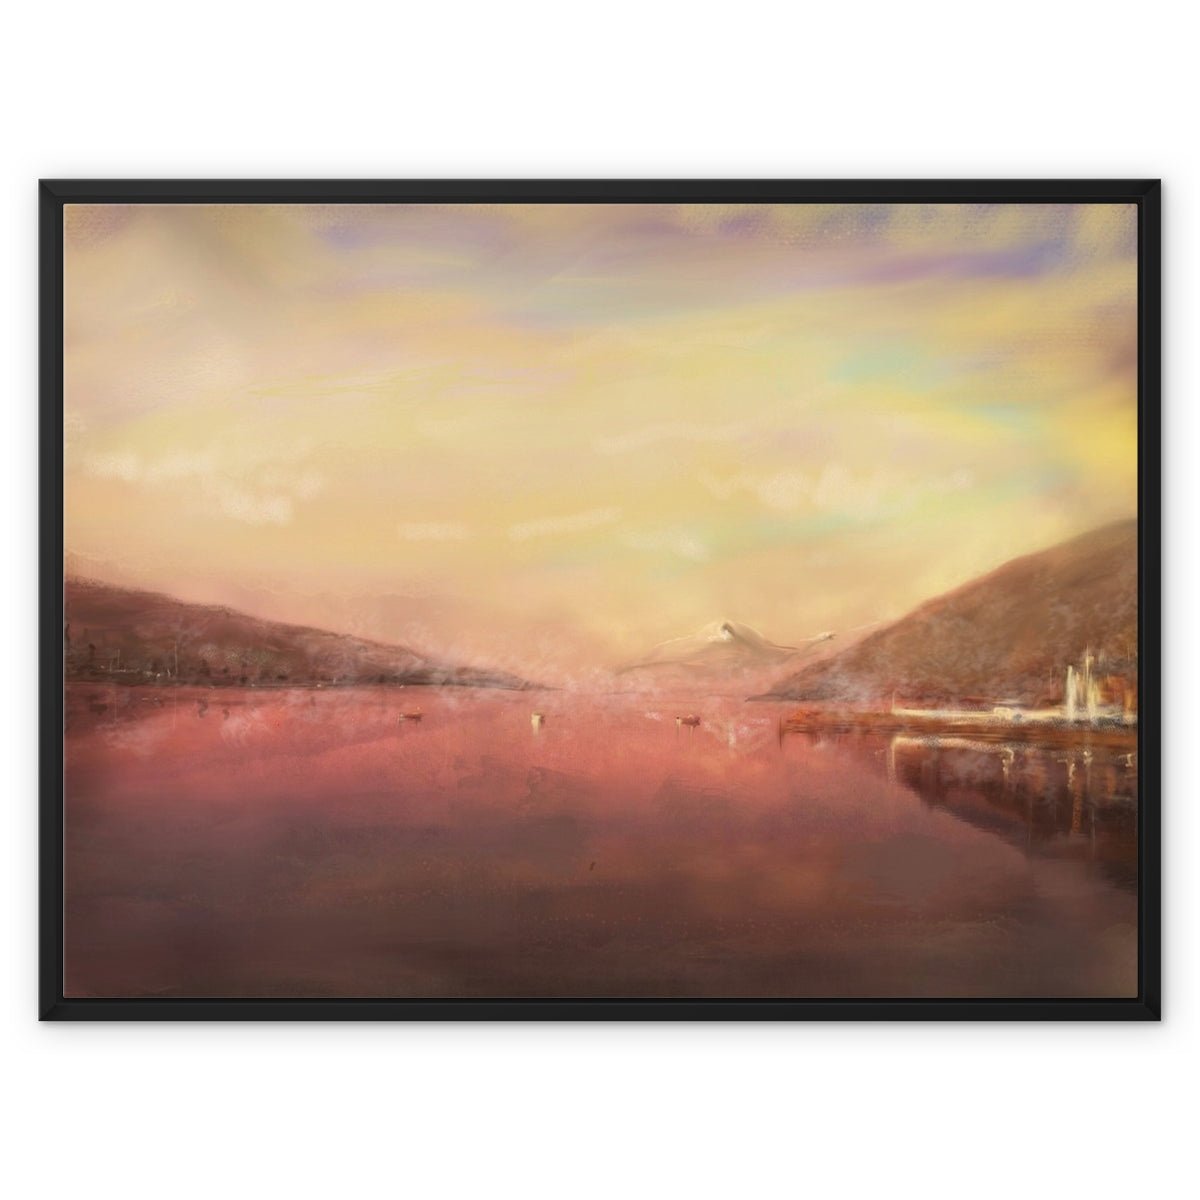 Loch Tay Painting | Framed Canvas From Scotland-Floating Framed Canvas Prints-Scottish Lochs & Mountains Art Gallery-32"x24"-Black Frame-Paintings, Prints, Homeware, Art Gifts From Scotland By Scottish Artist Kevin Hunter